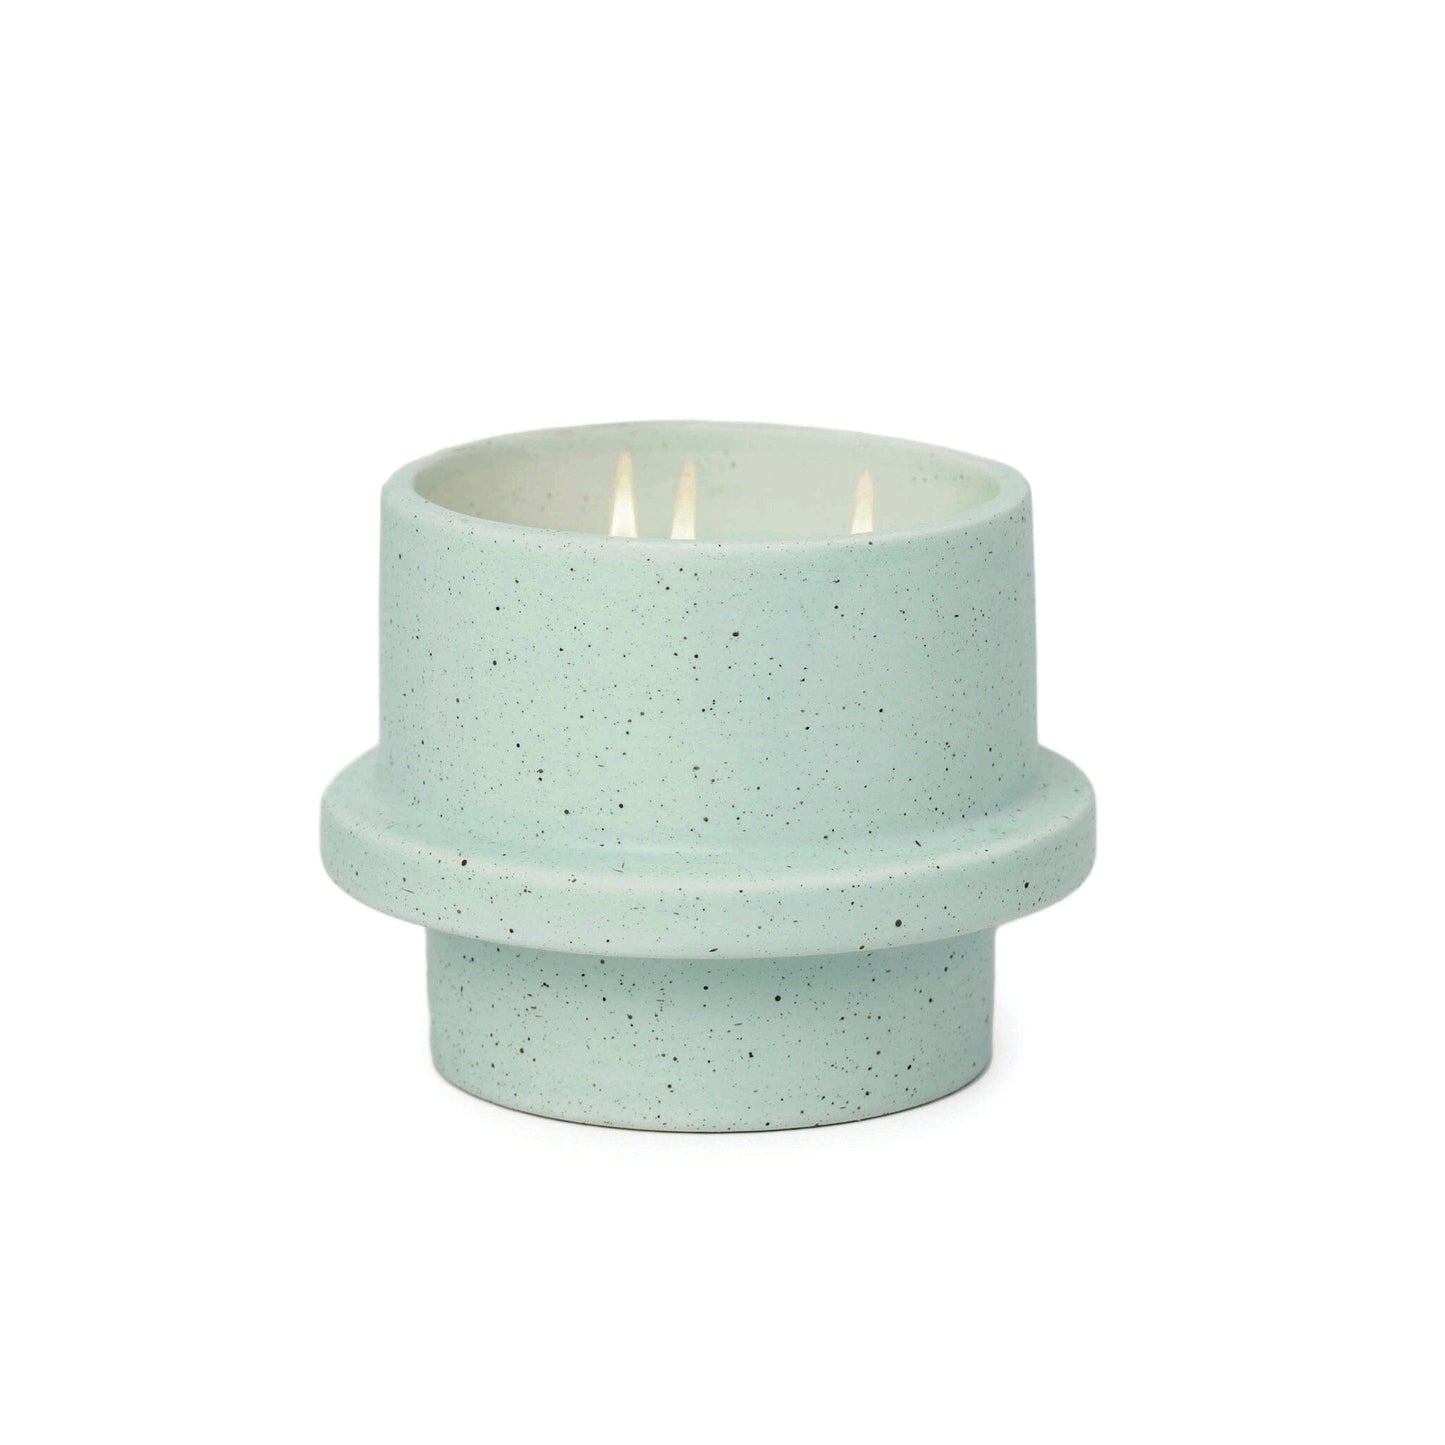 Paddywax Folia Ceramic Candle Salt & Sage - Scented Candle